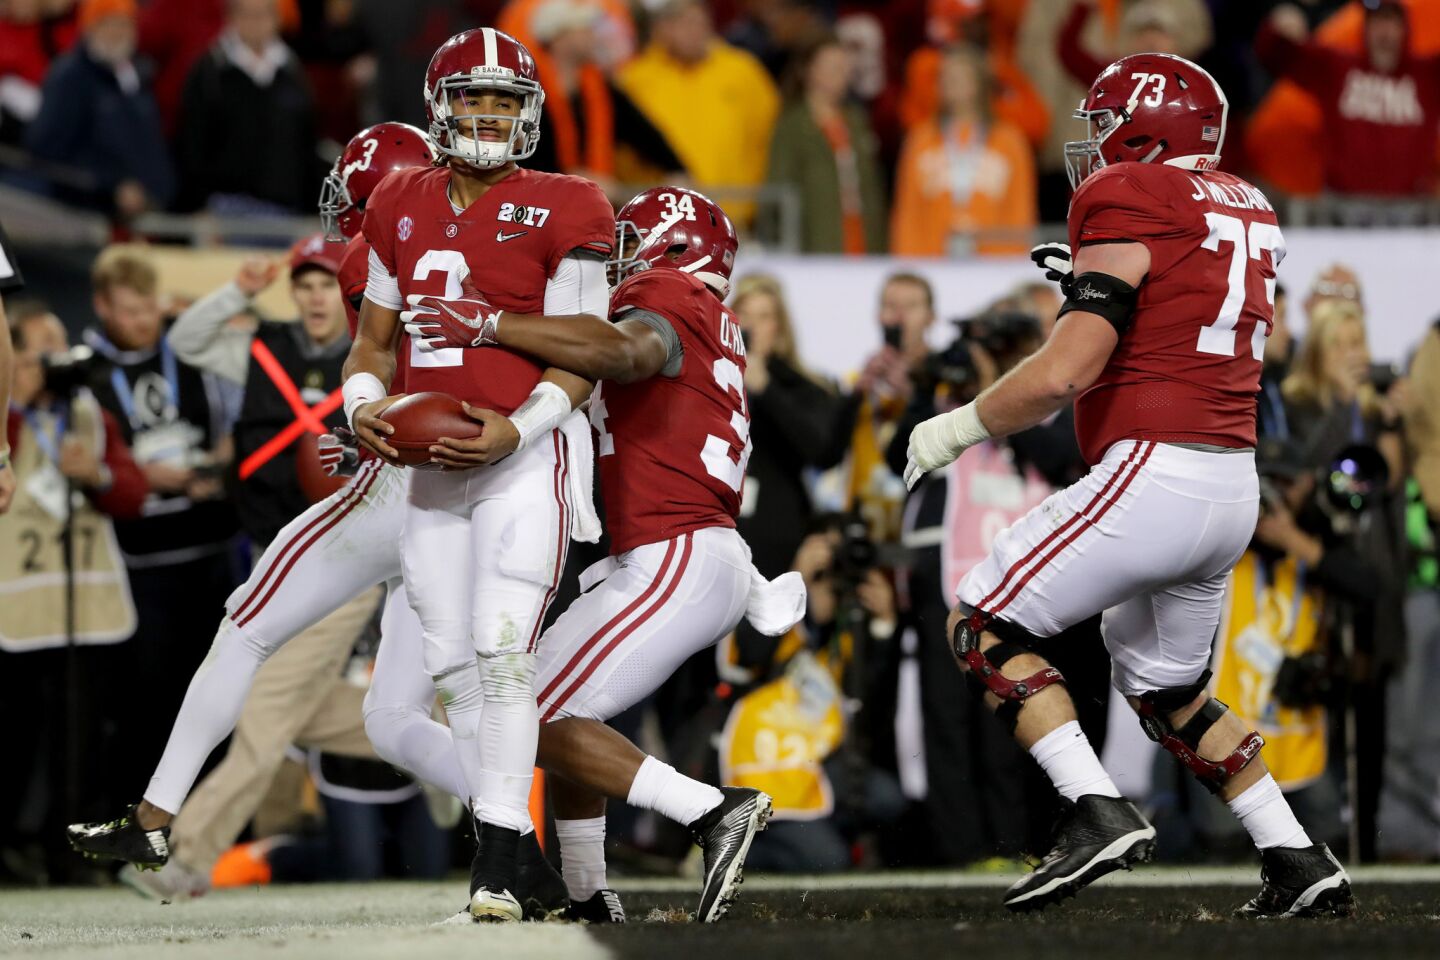 Alabama quarterback Jalen Hurts (2) celebrates with teammates after rushing for a 30-yard touchdown during the fourth quarter.